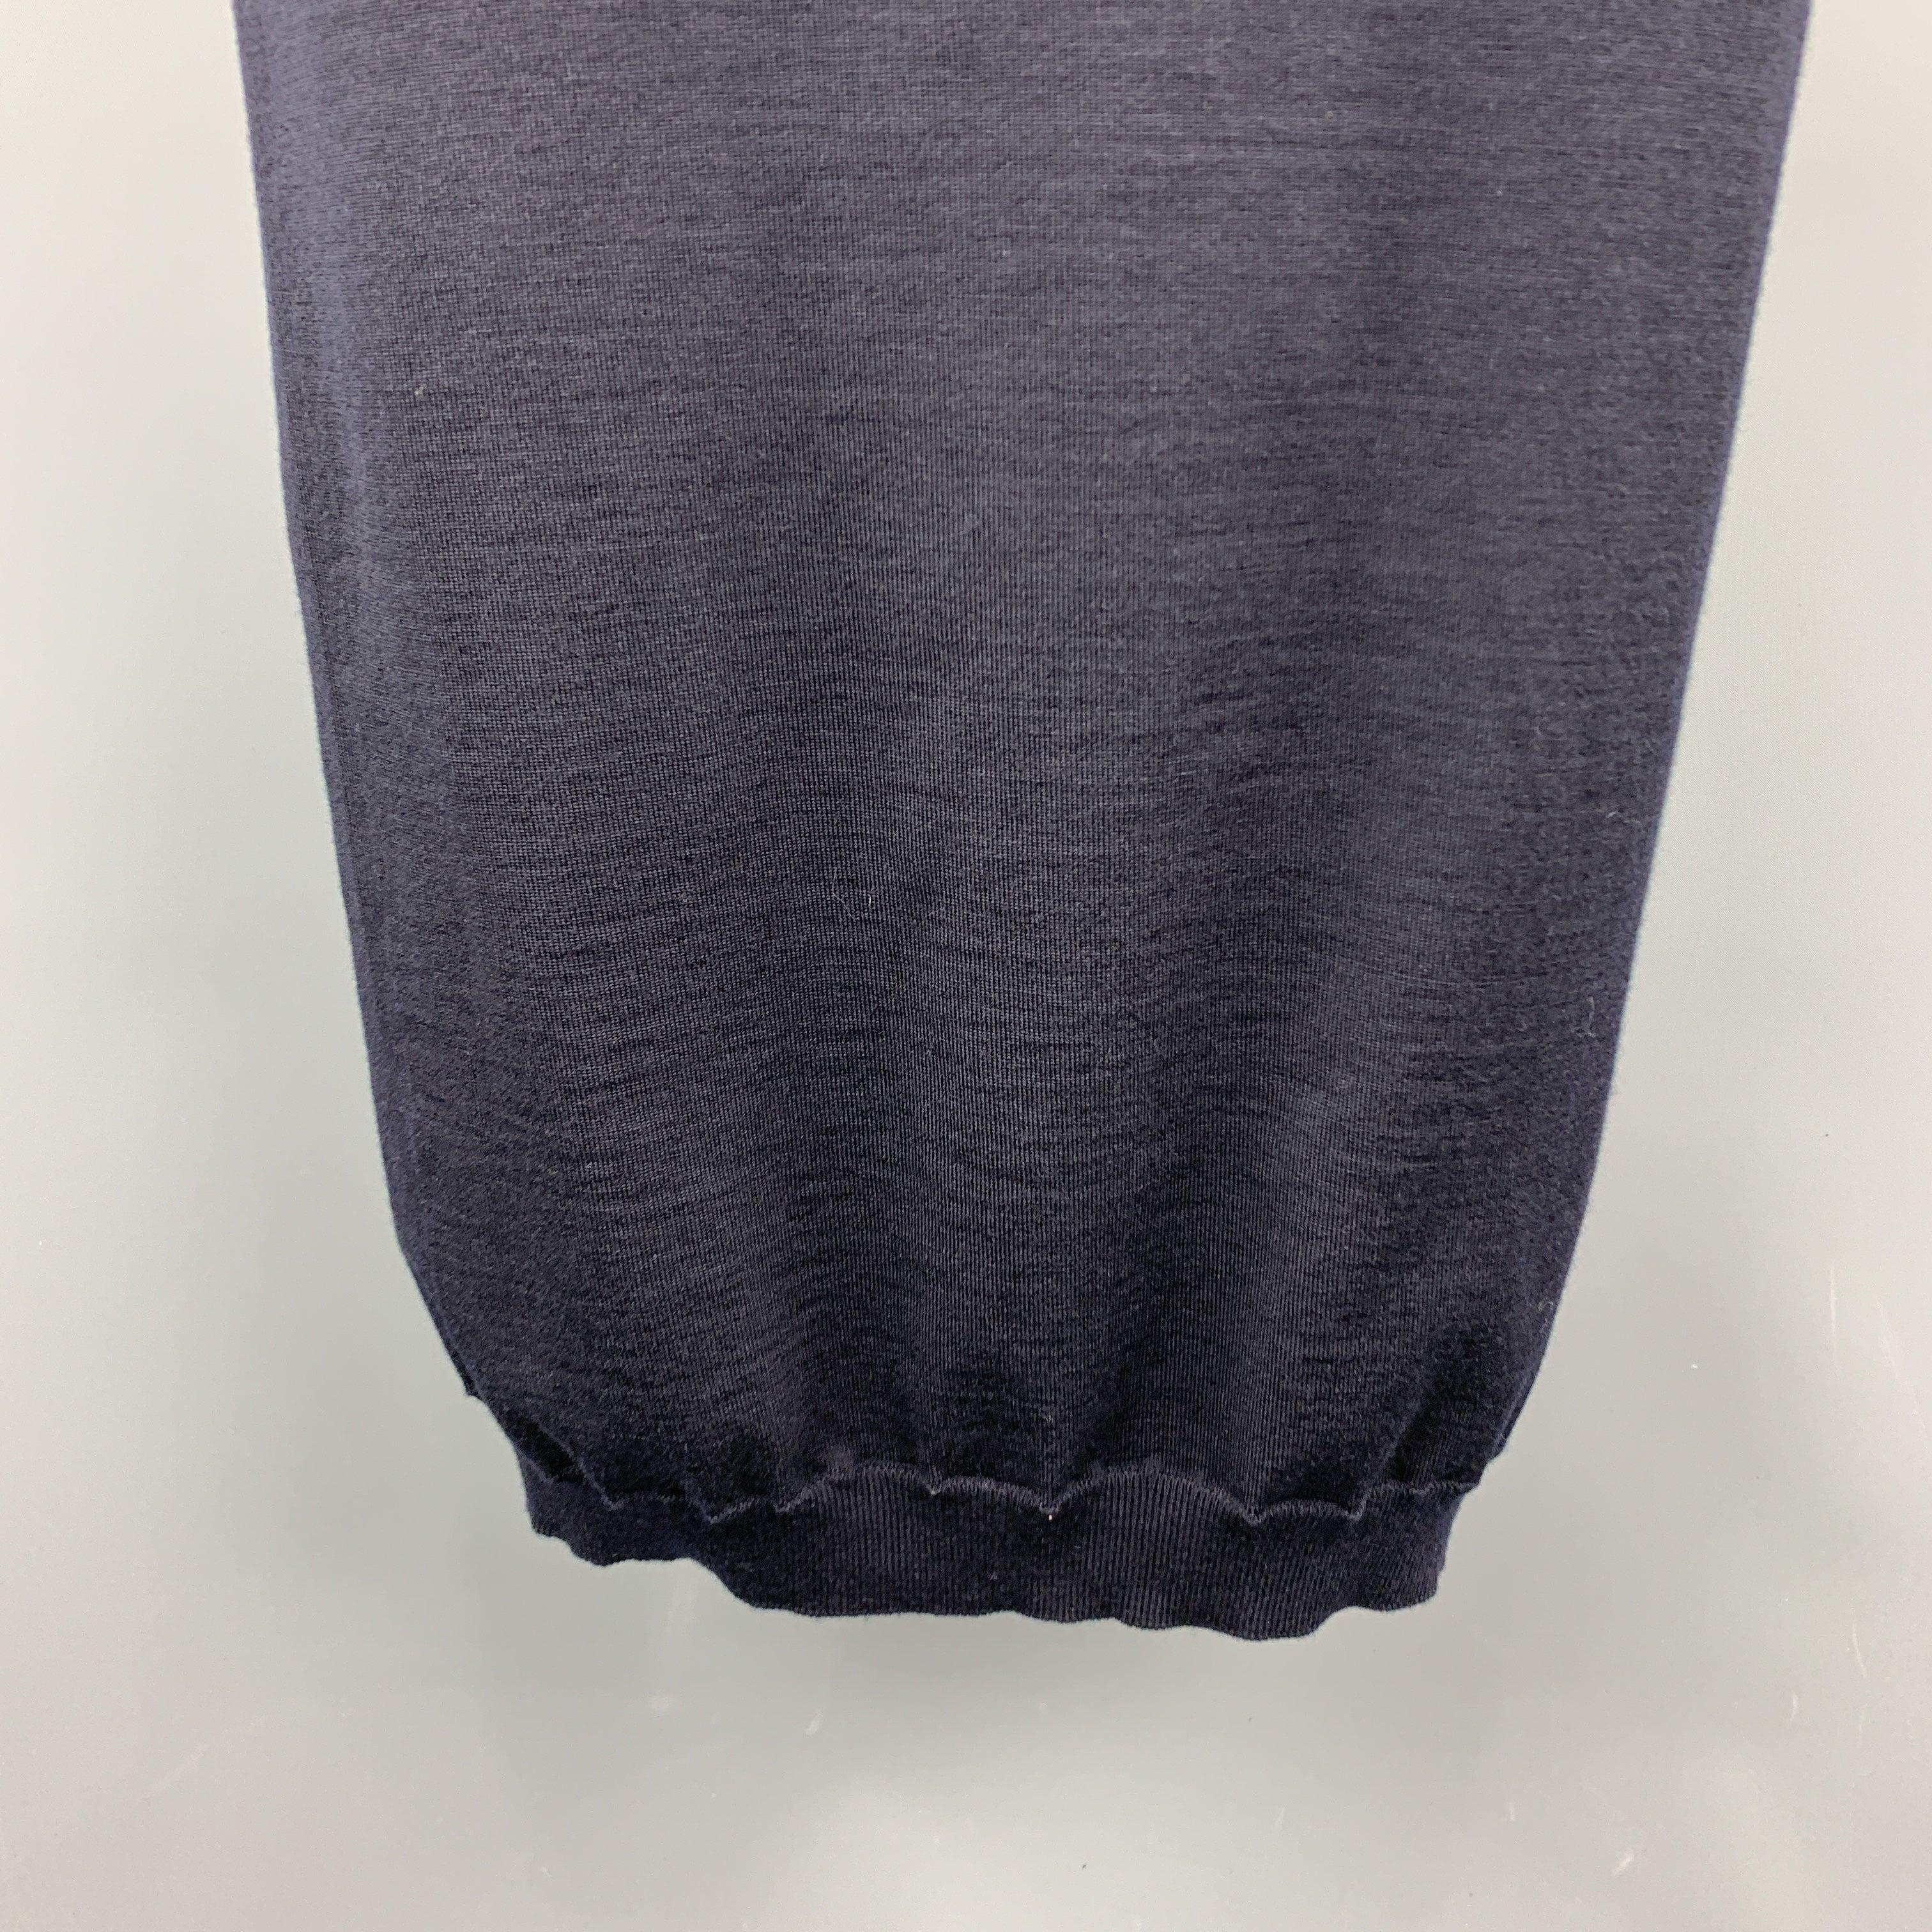 GOLDEN GOOSE skirt comes in navy merino wool blend stretch knit with a pencil silhouette. Made in Italy.
Excellent Pre-Owned Condition.
 

Marked:   M
 

Measurements: 
  
l	Waist: 26 inches 
l	Hip: 32 inches 
l	Length: 33 inches 

  
  
  
